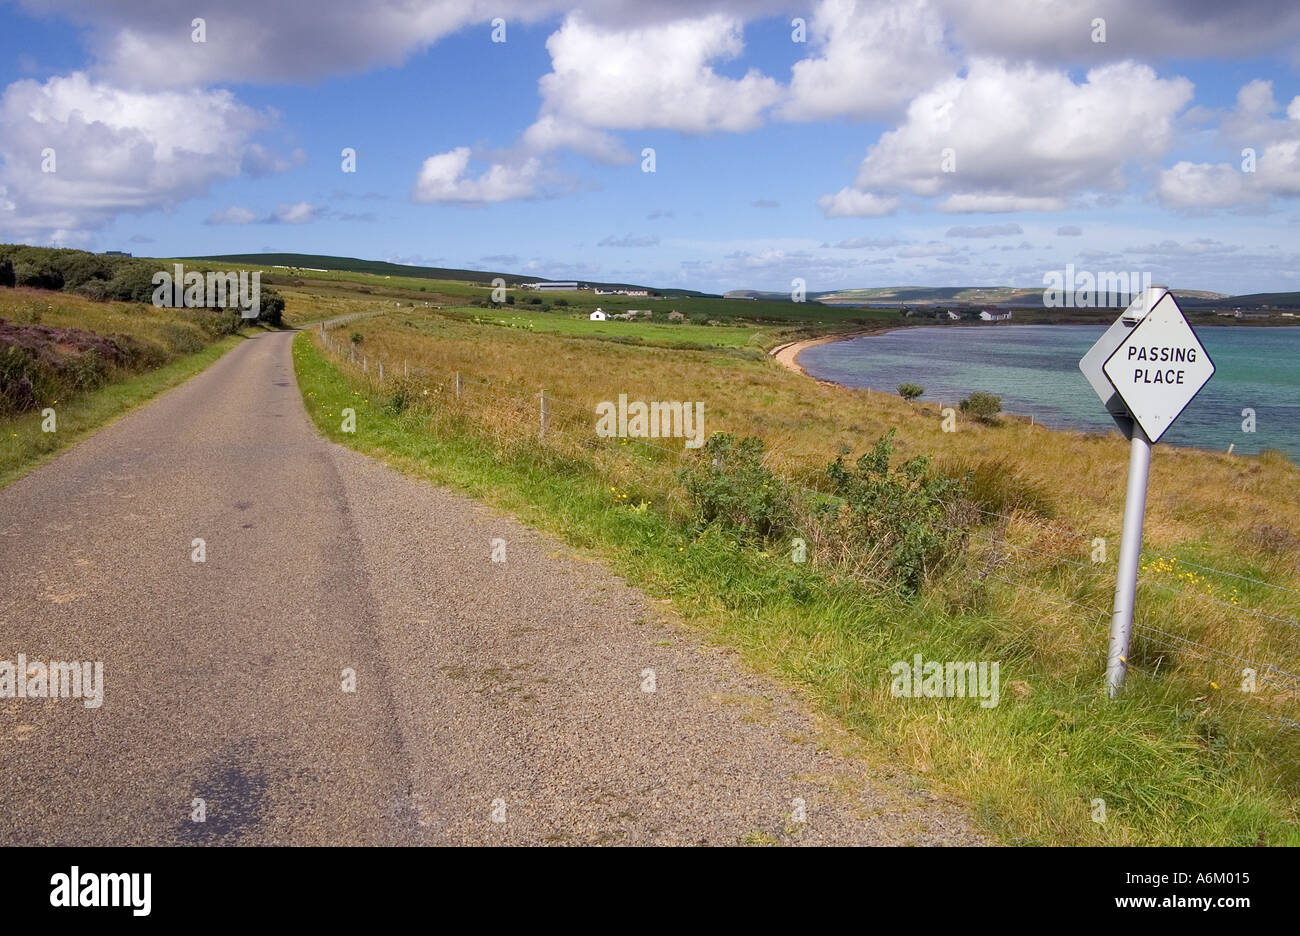 dh Bay of Quoys HOY ORKNEY Single track road passing place roadsign countryside scotland sign Stock Photo